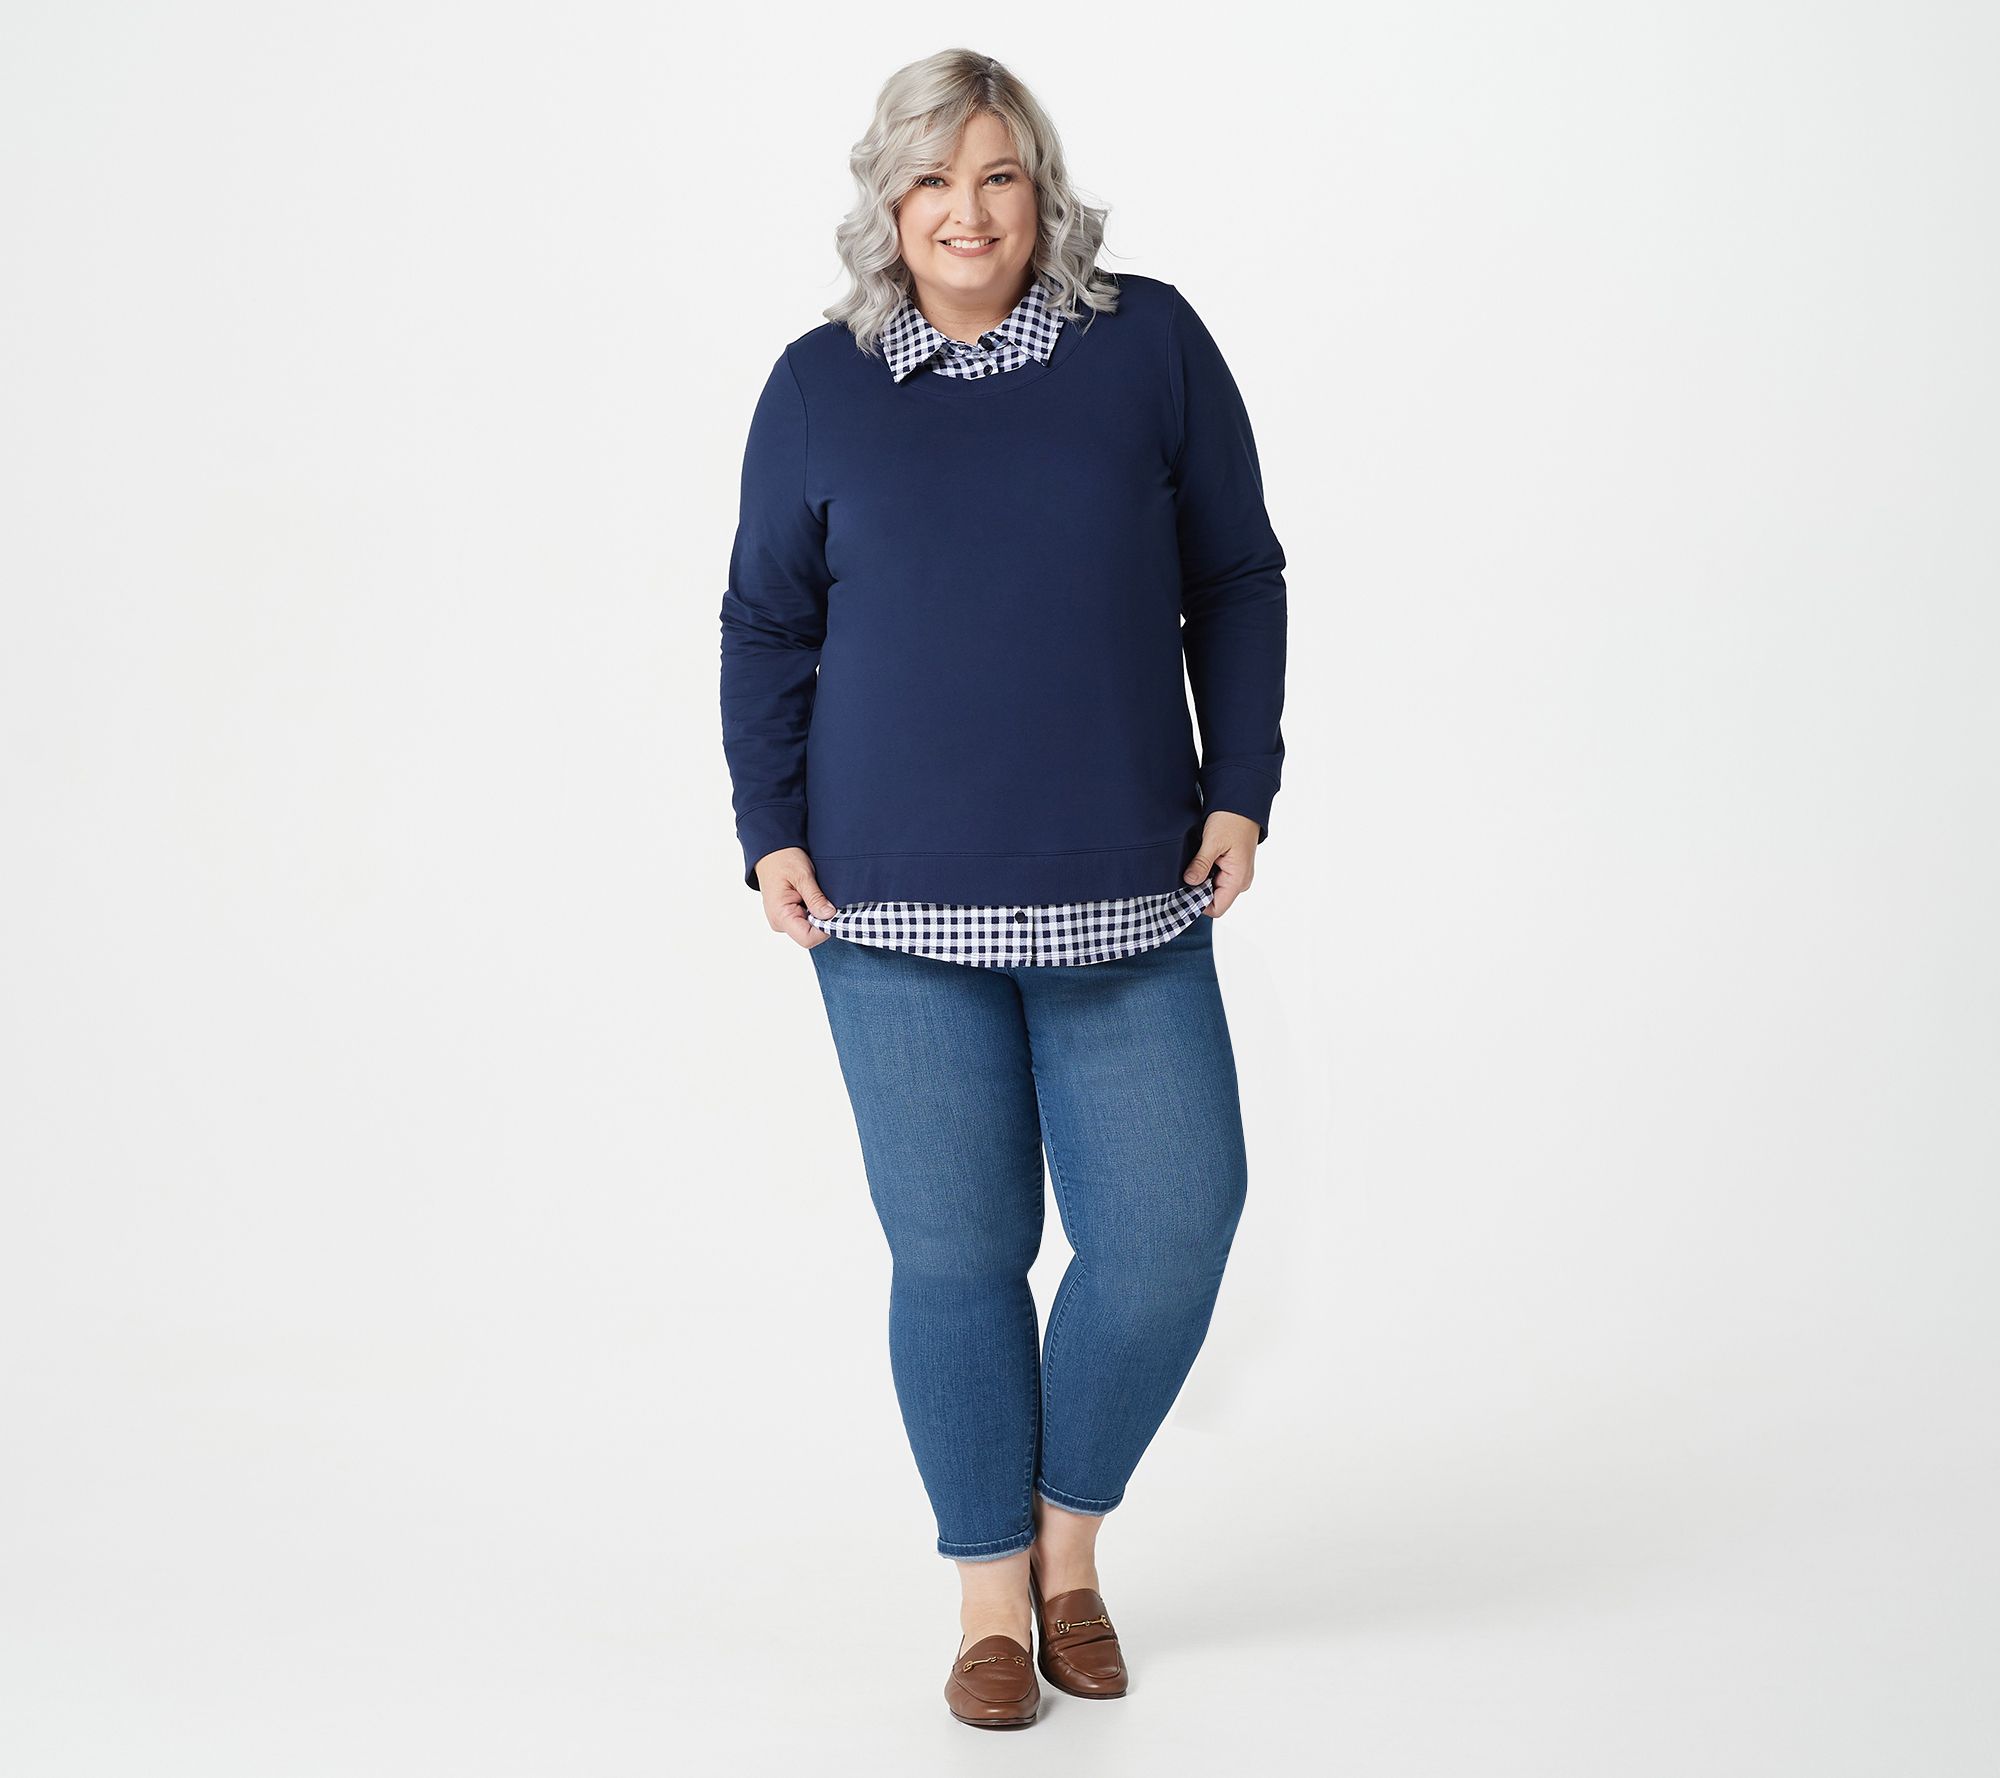 Denim & Co. French Terry Top with Printed Collar and Hem - QVC.com